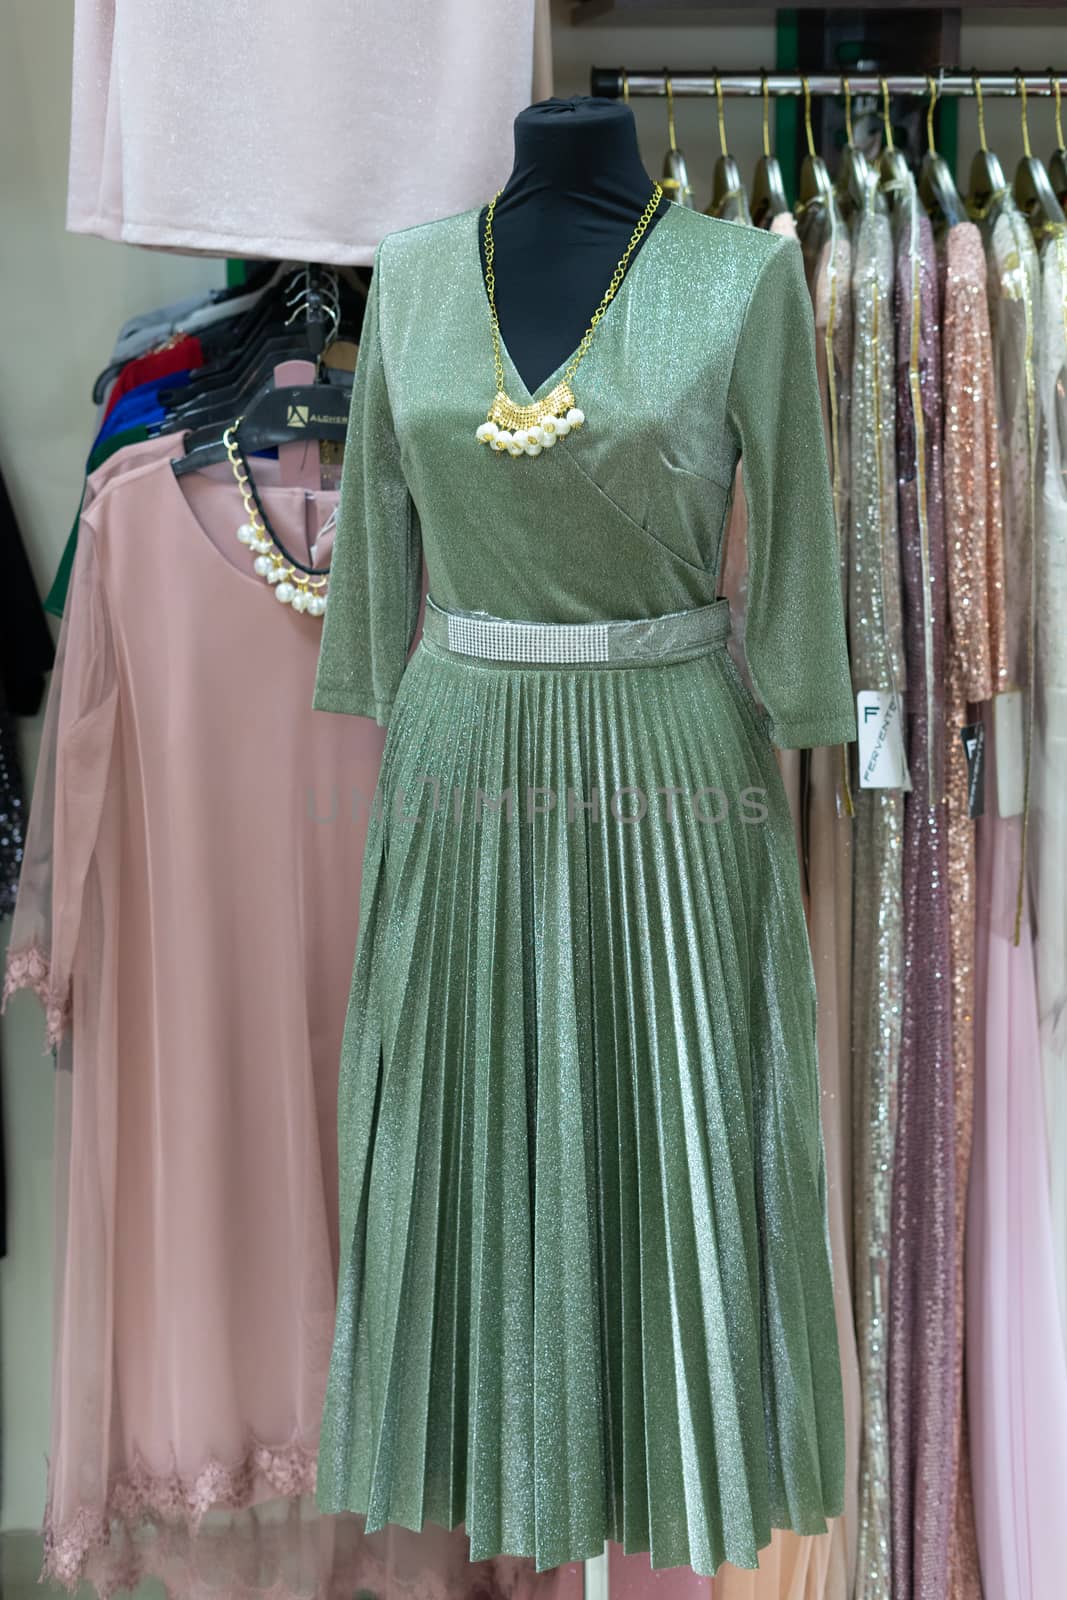 Full length dress. Green dress with a belt hanging on a mannequin. Retail